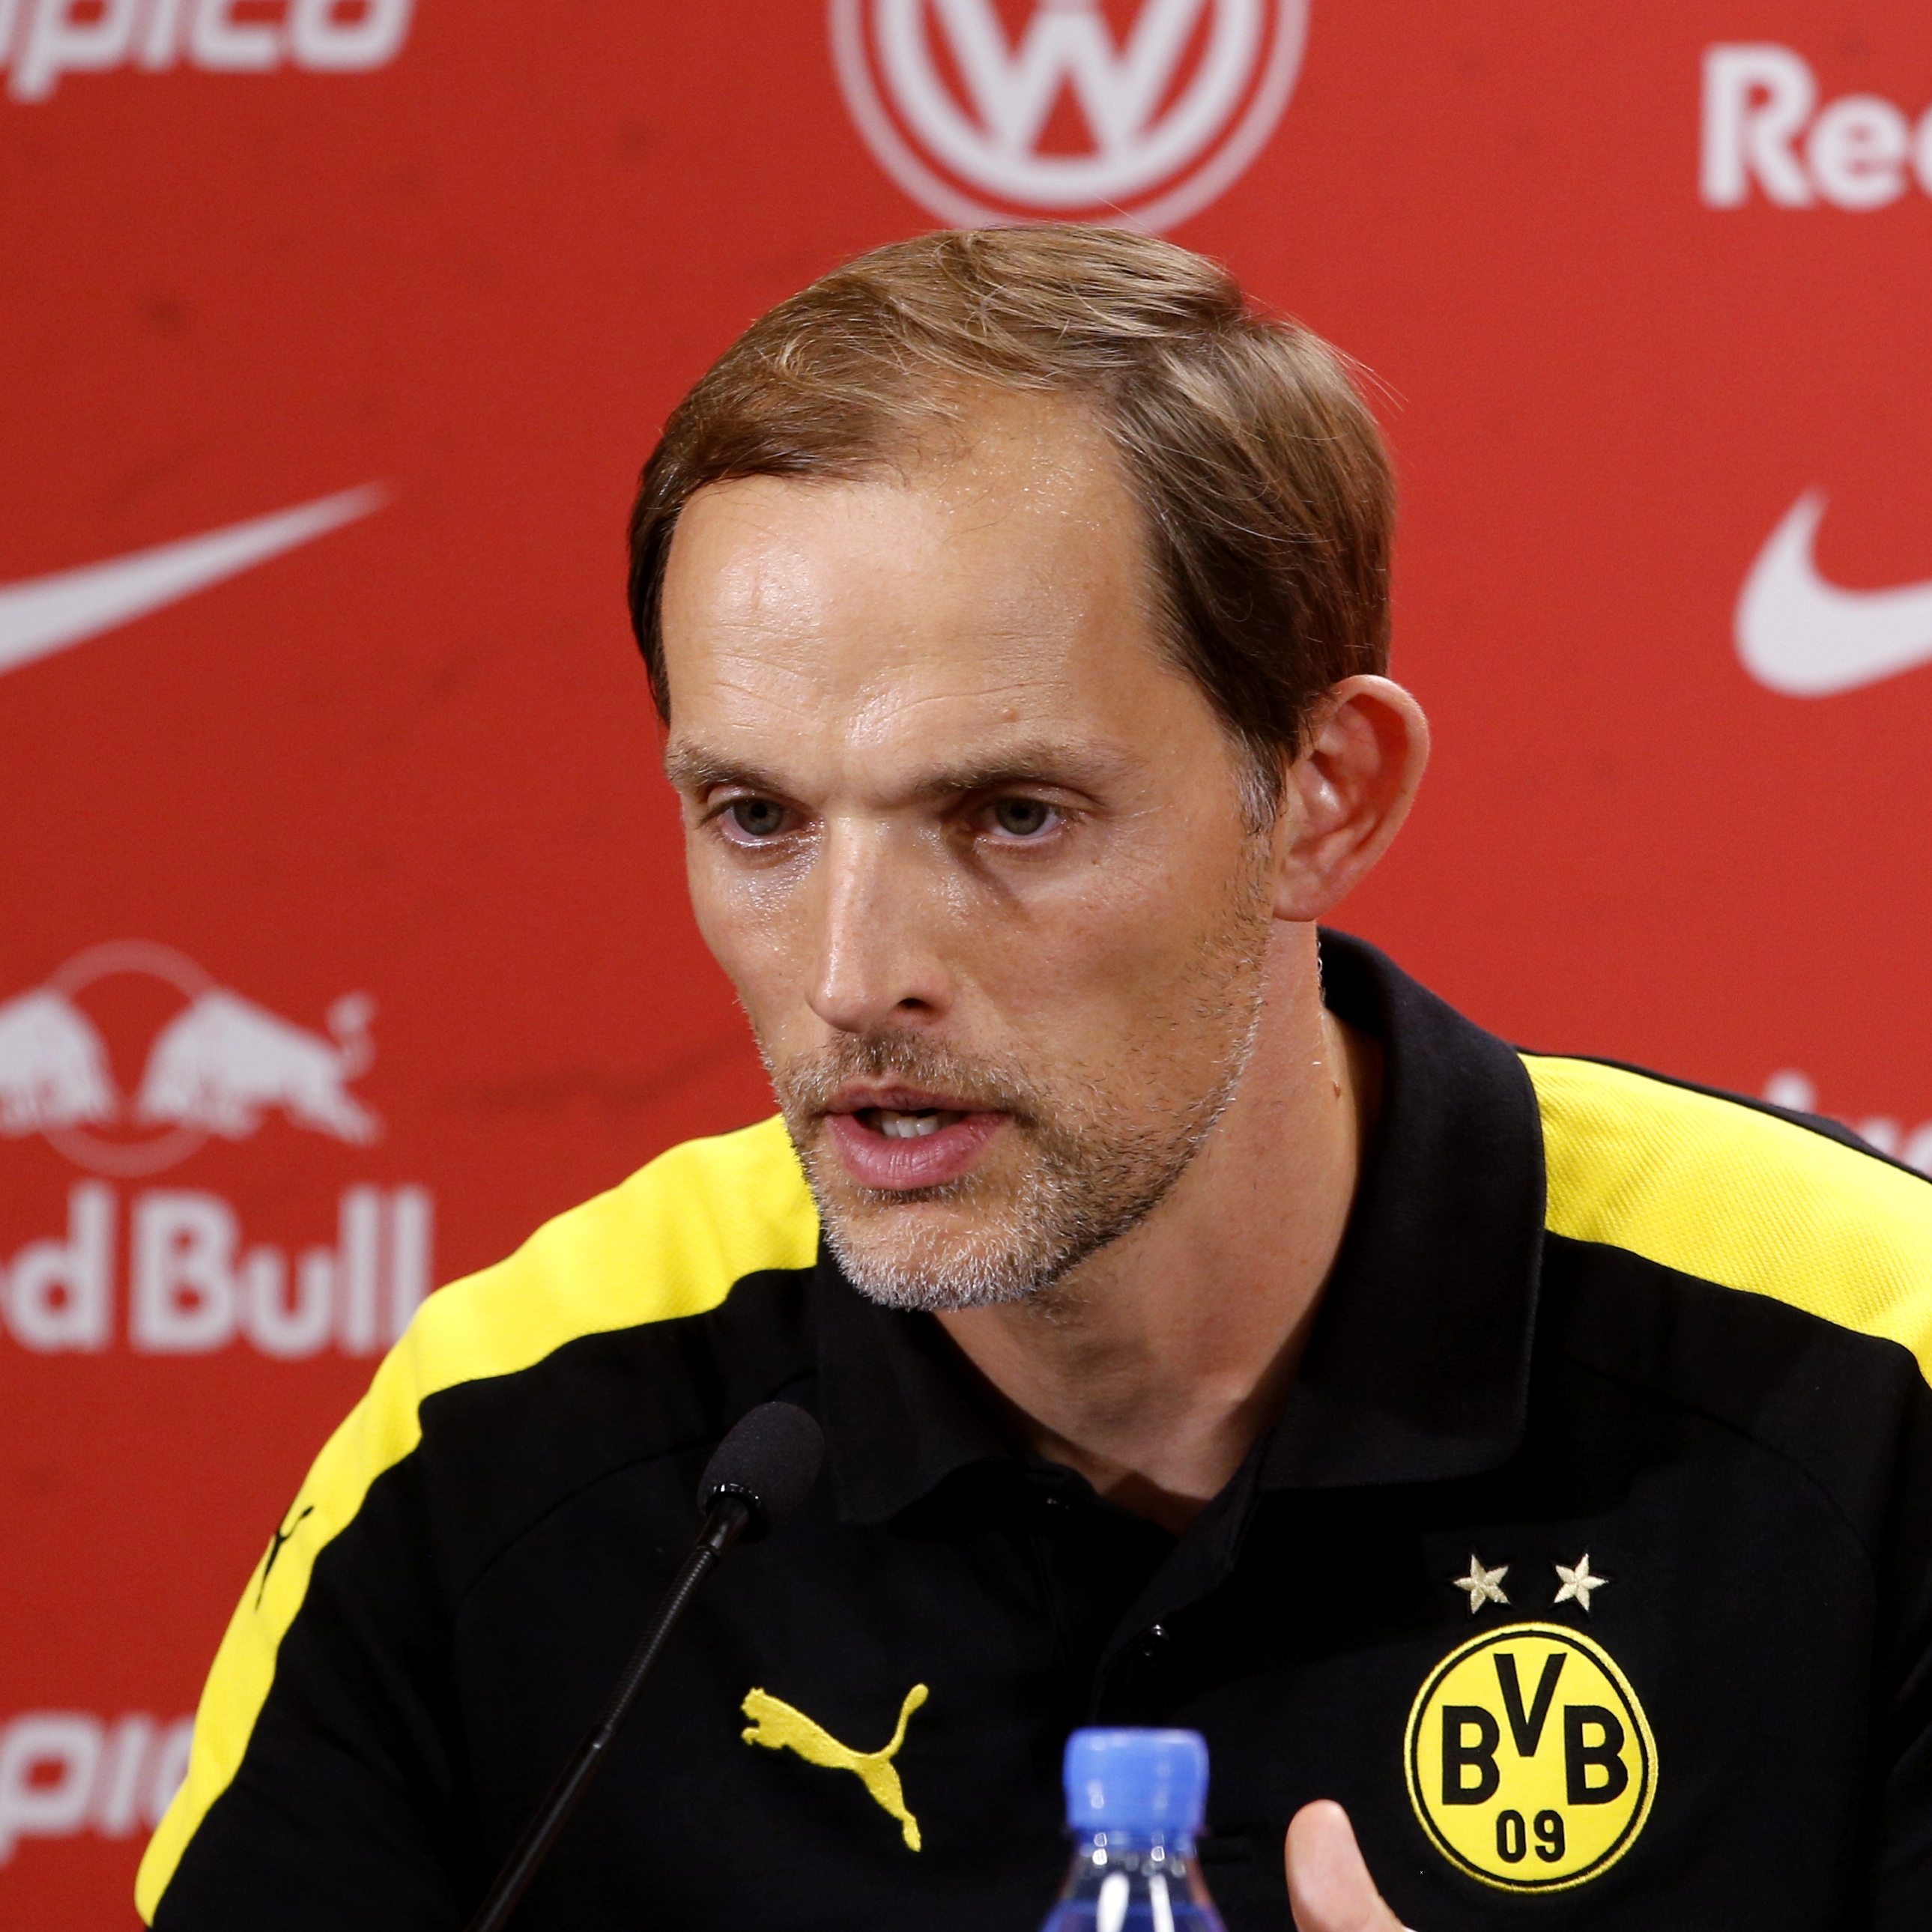 @curlytales/tuchel-need-to-marking-after